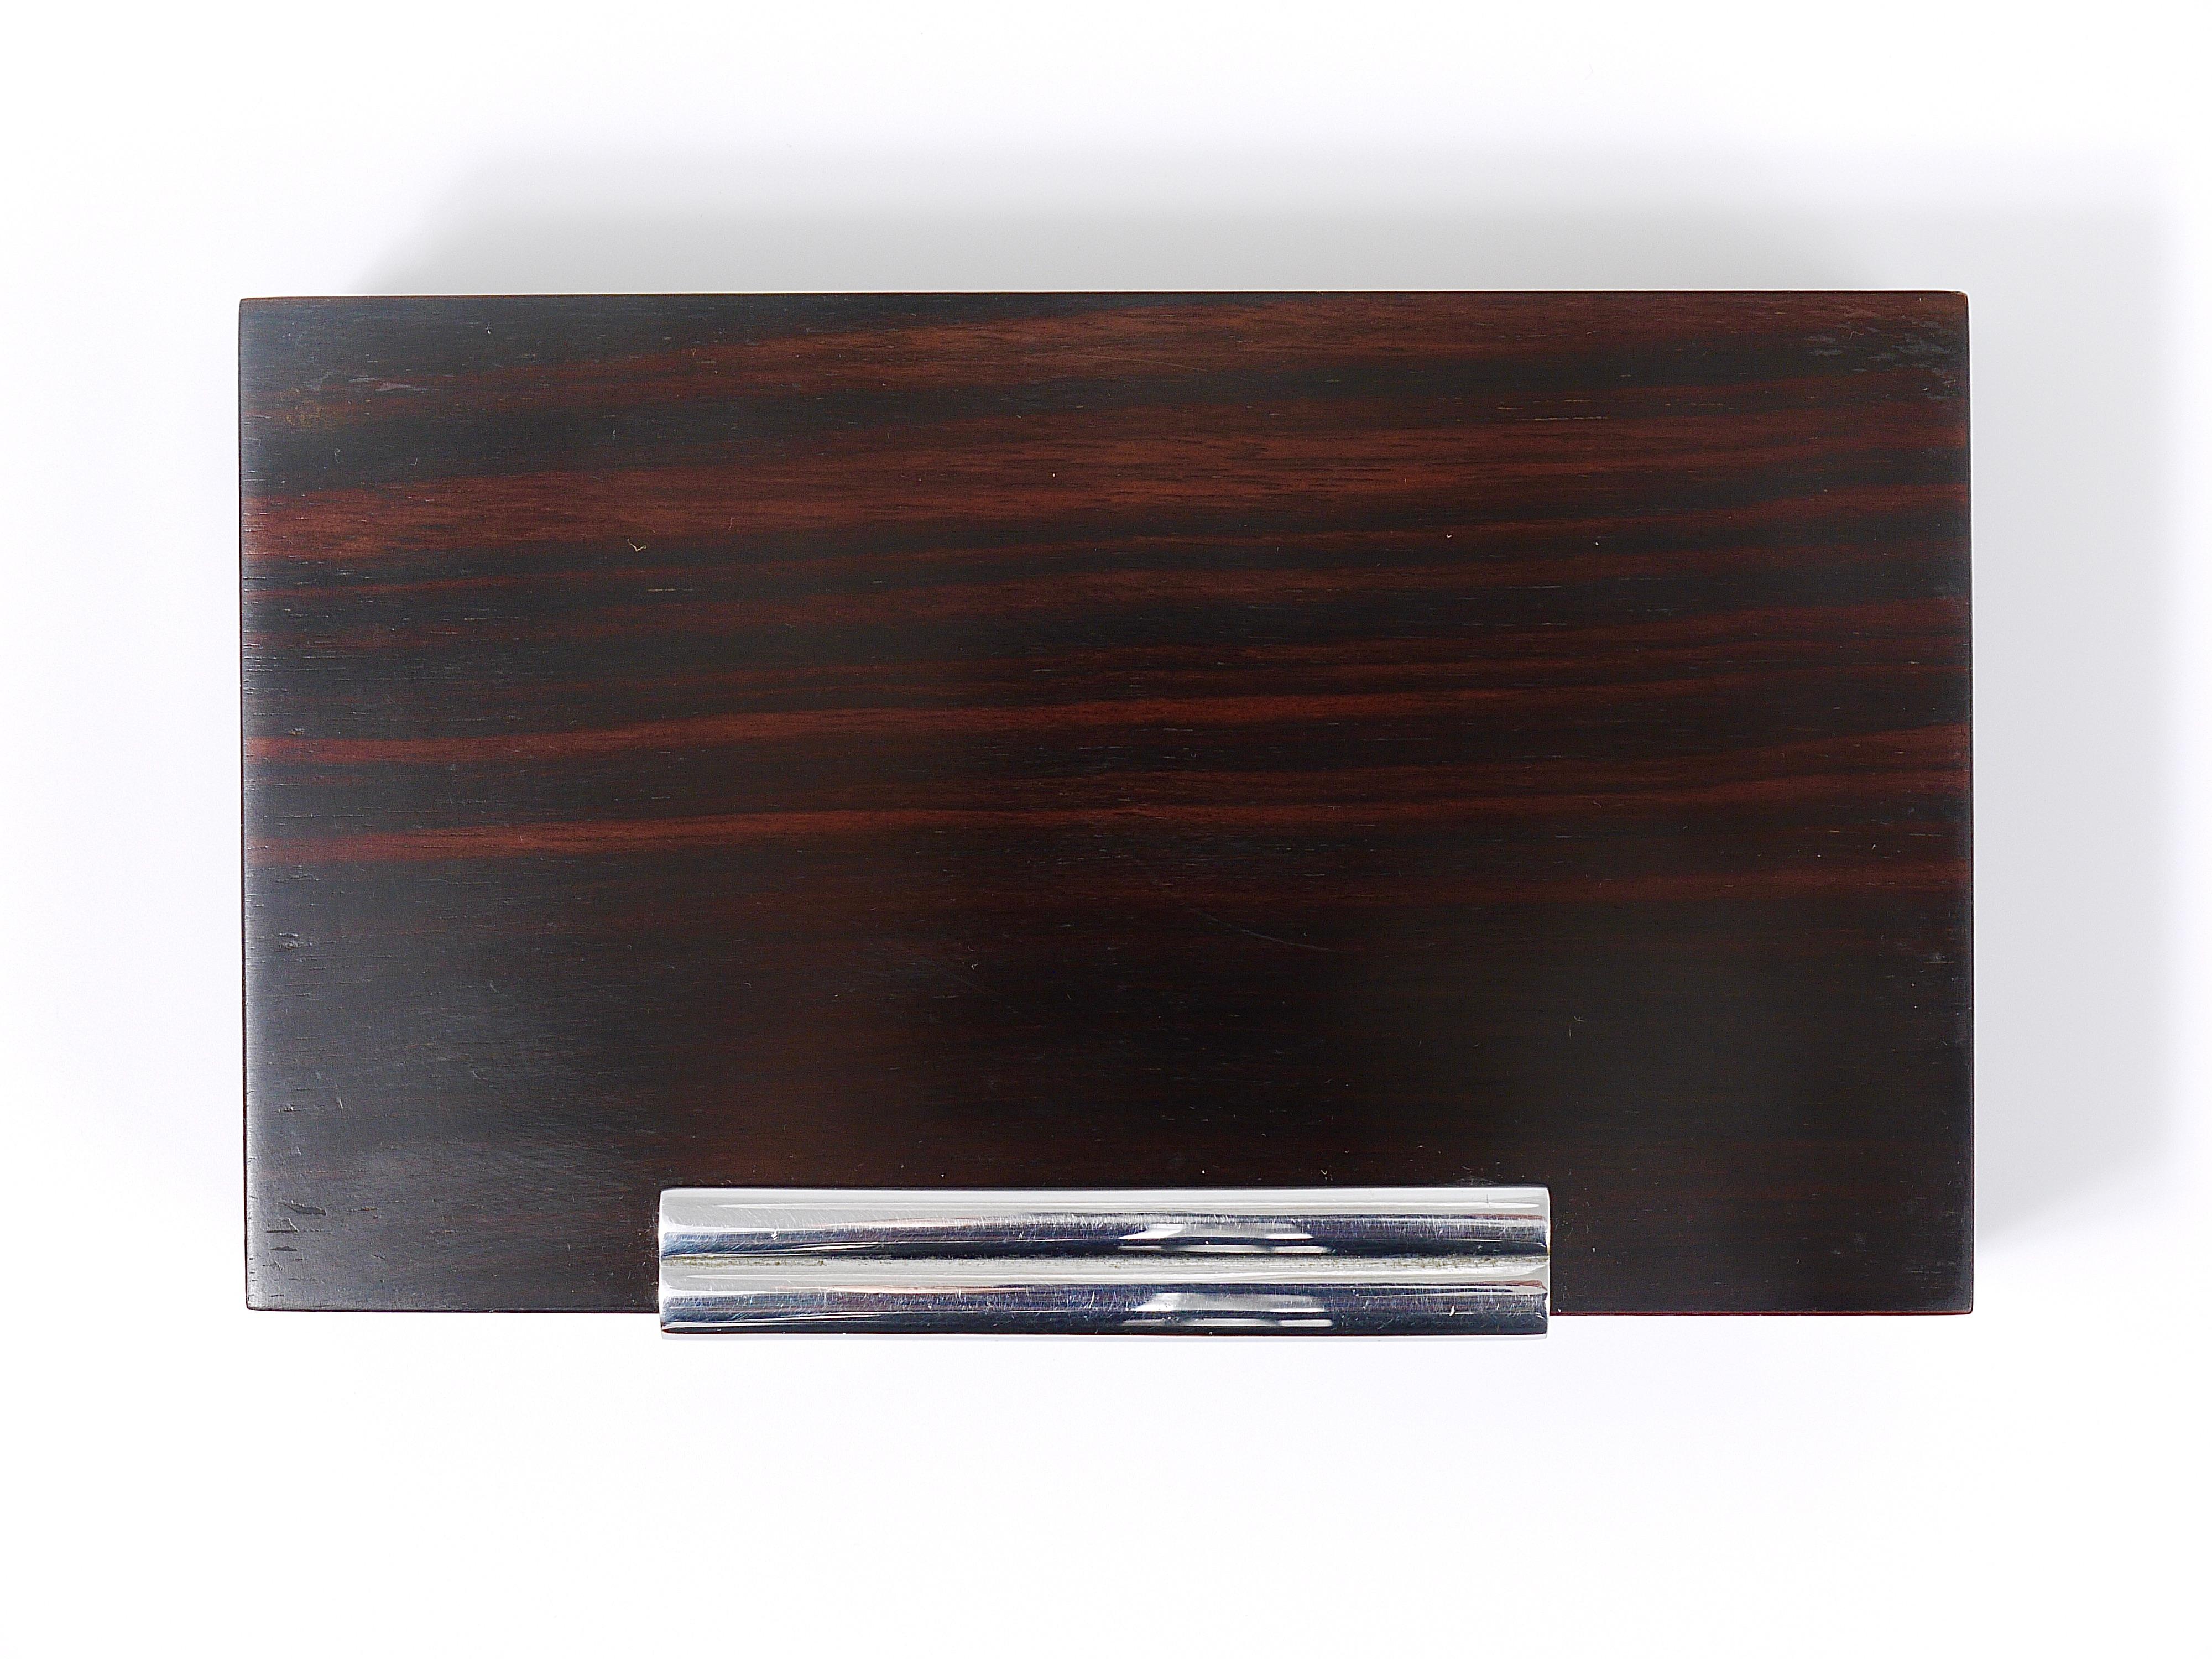 French Art Deco Rosewood & Nickel Storage Box, Maison Desny Style, France, 1930s For Sale 11